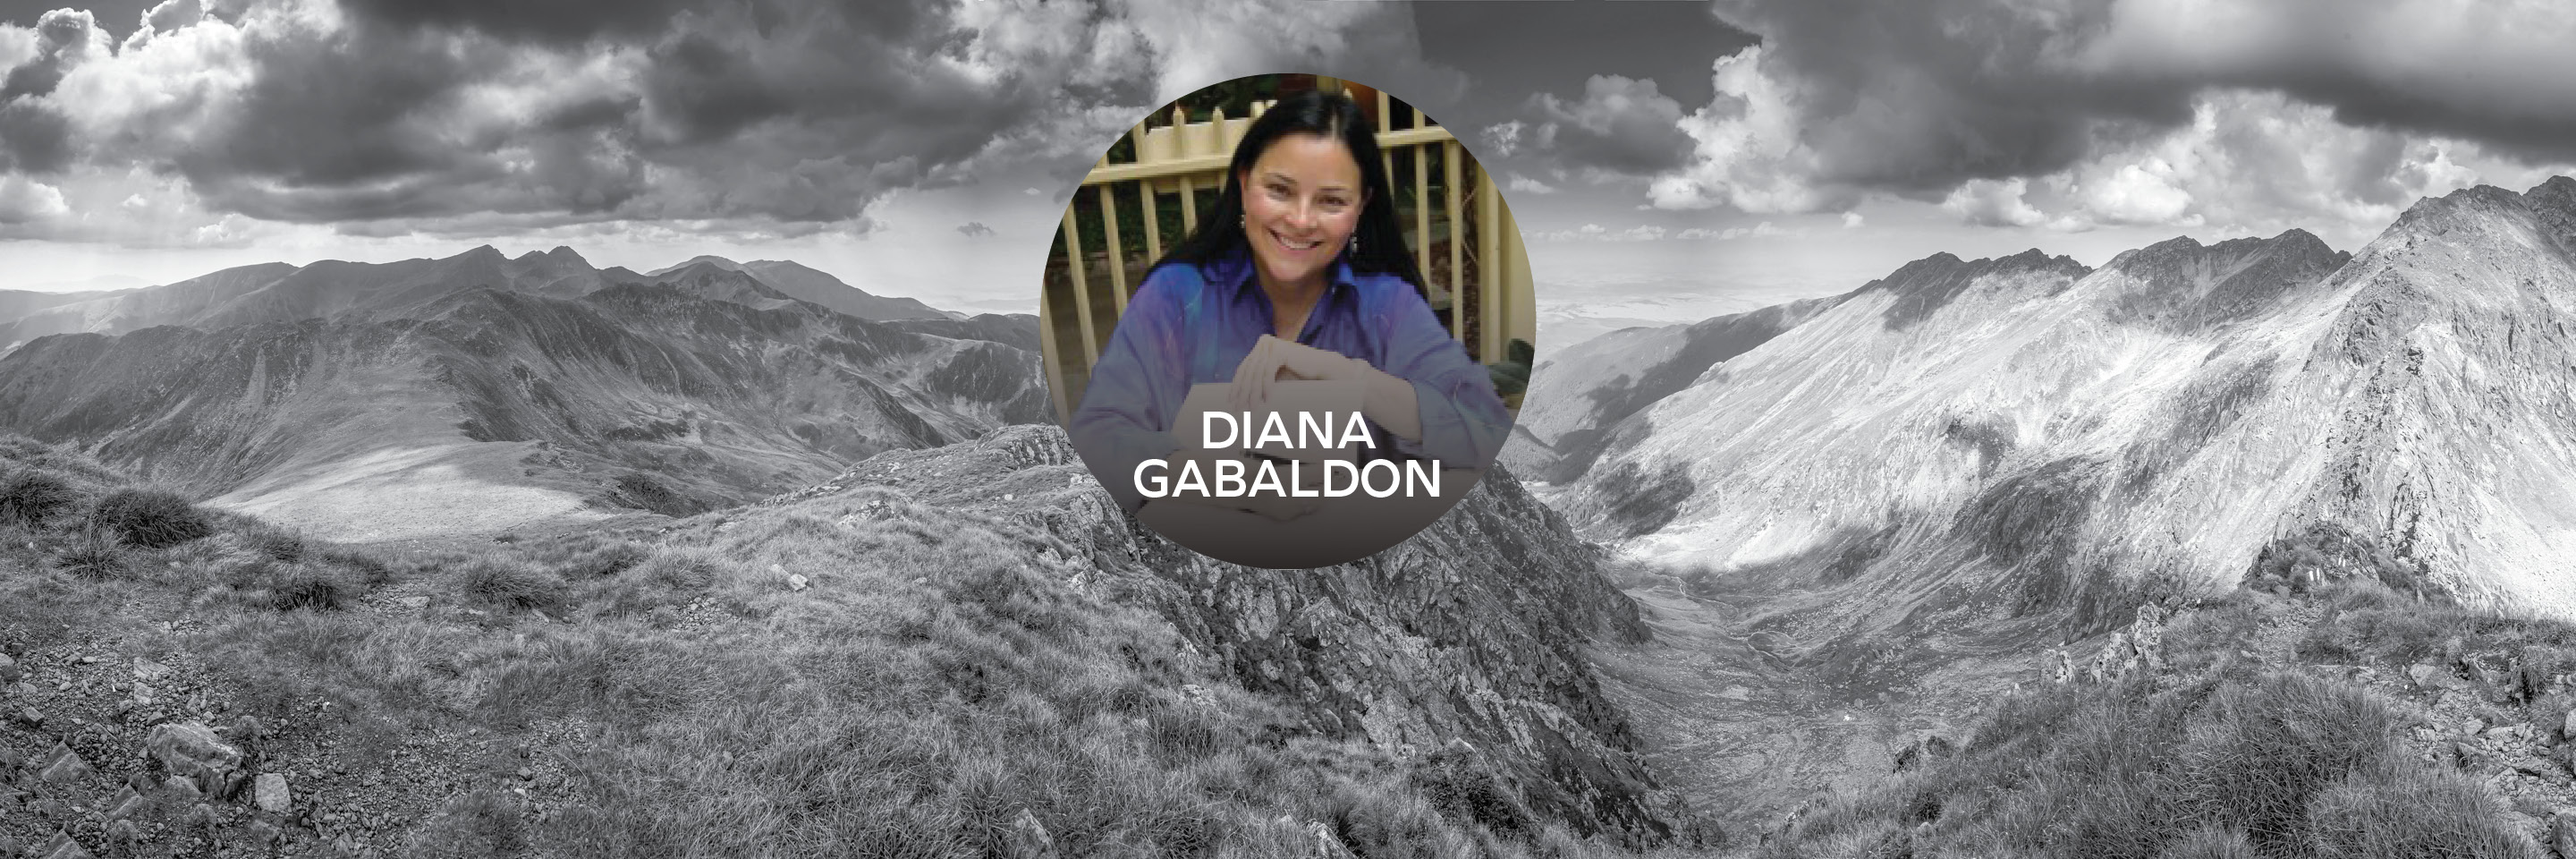 Go Tell the Bees… The Danube from Germany to the Black Sea Come True with Diana Gabaldon (plus 2 nights in Transylvania)